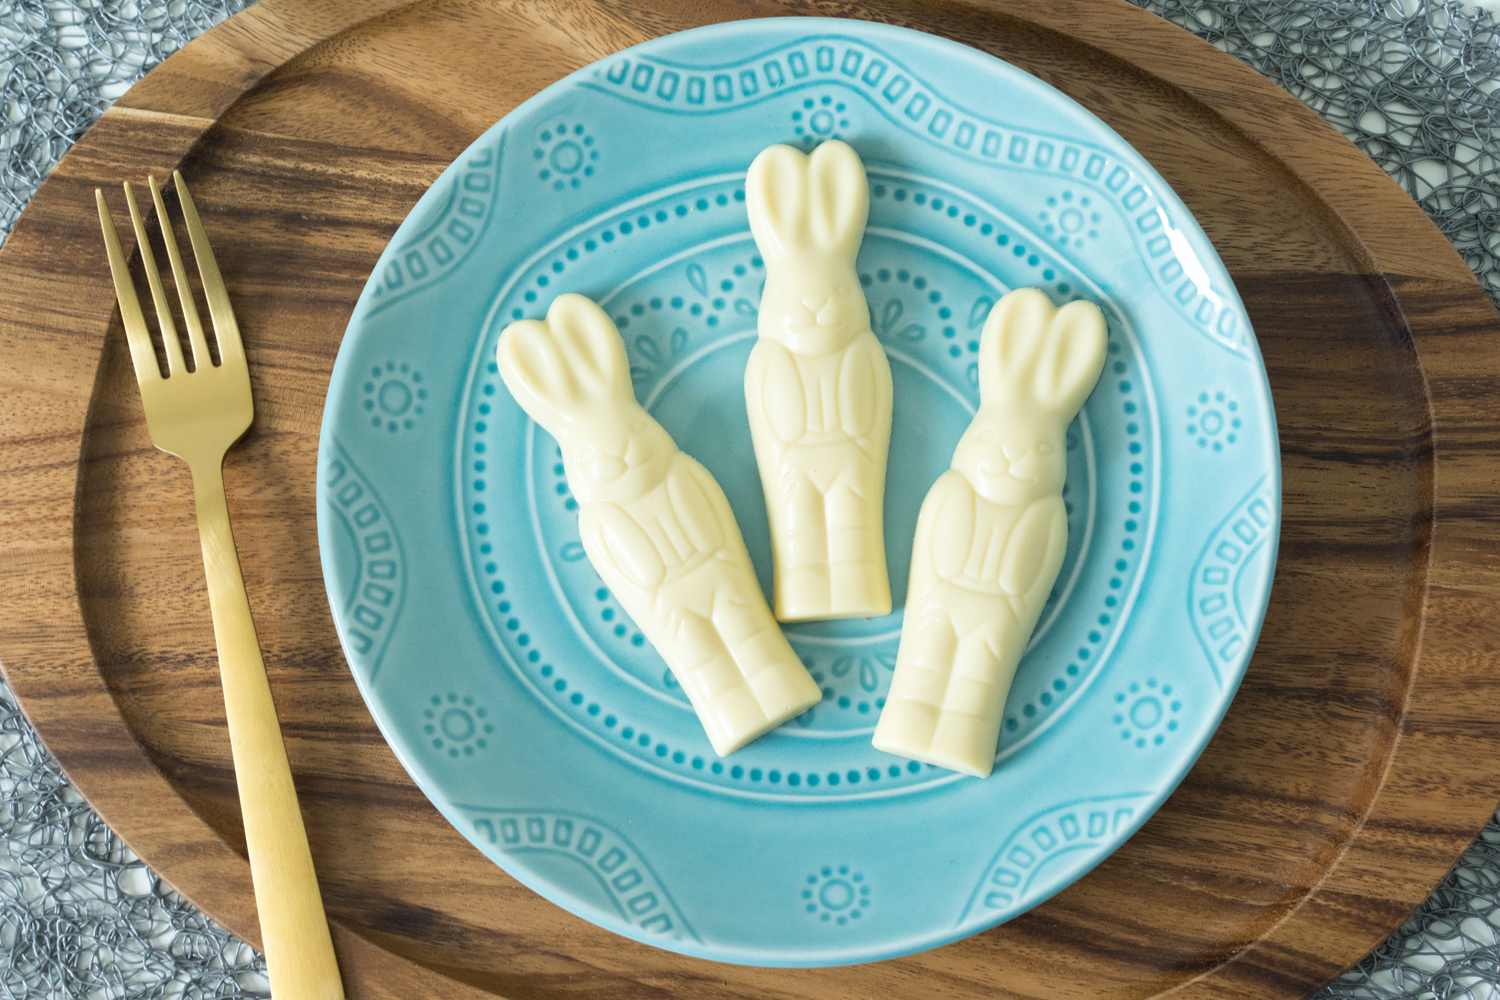 Narrow bunnies molded Easter chocolate from Delysia Chocolatier